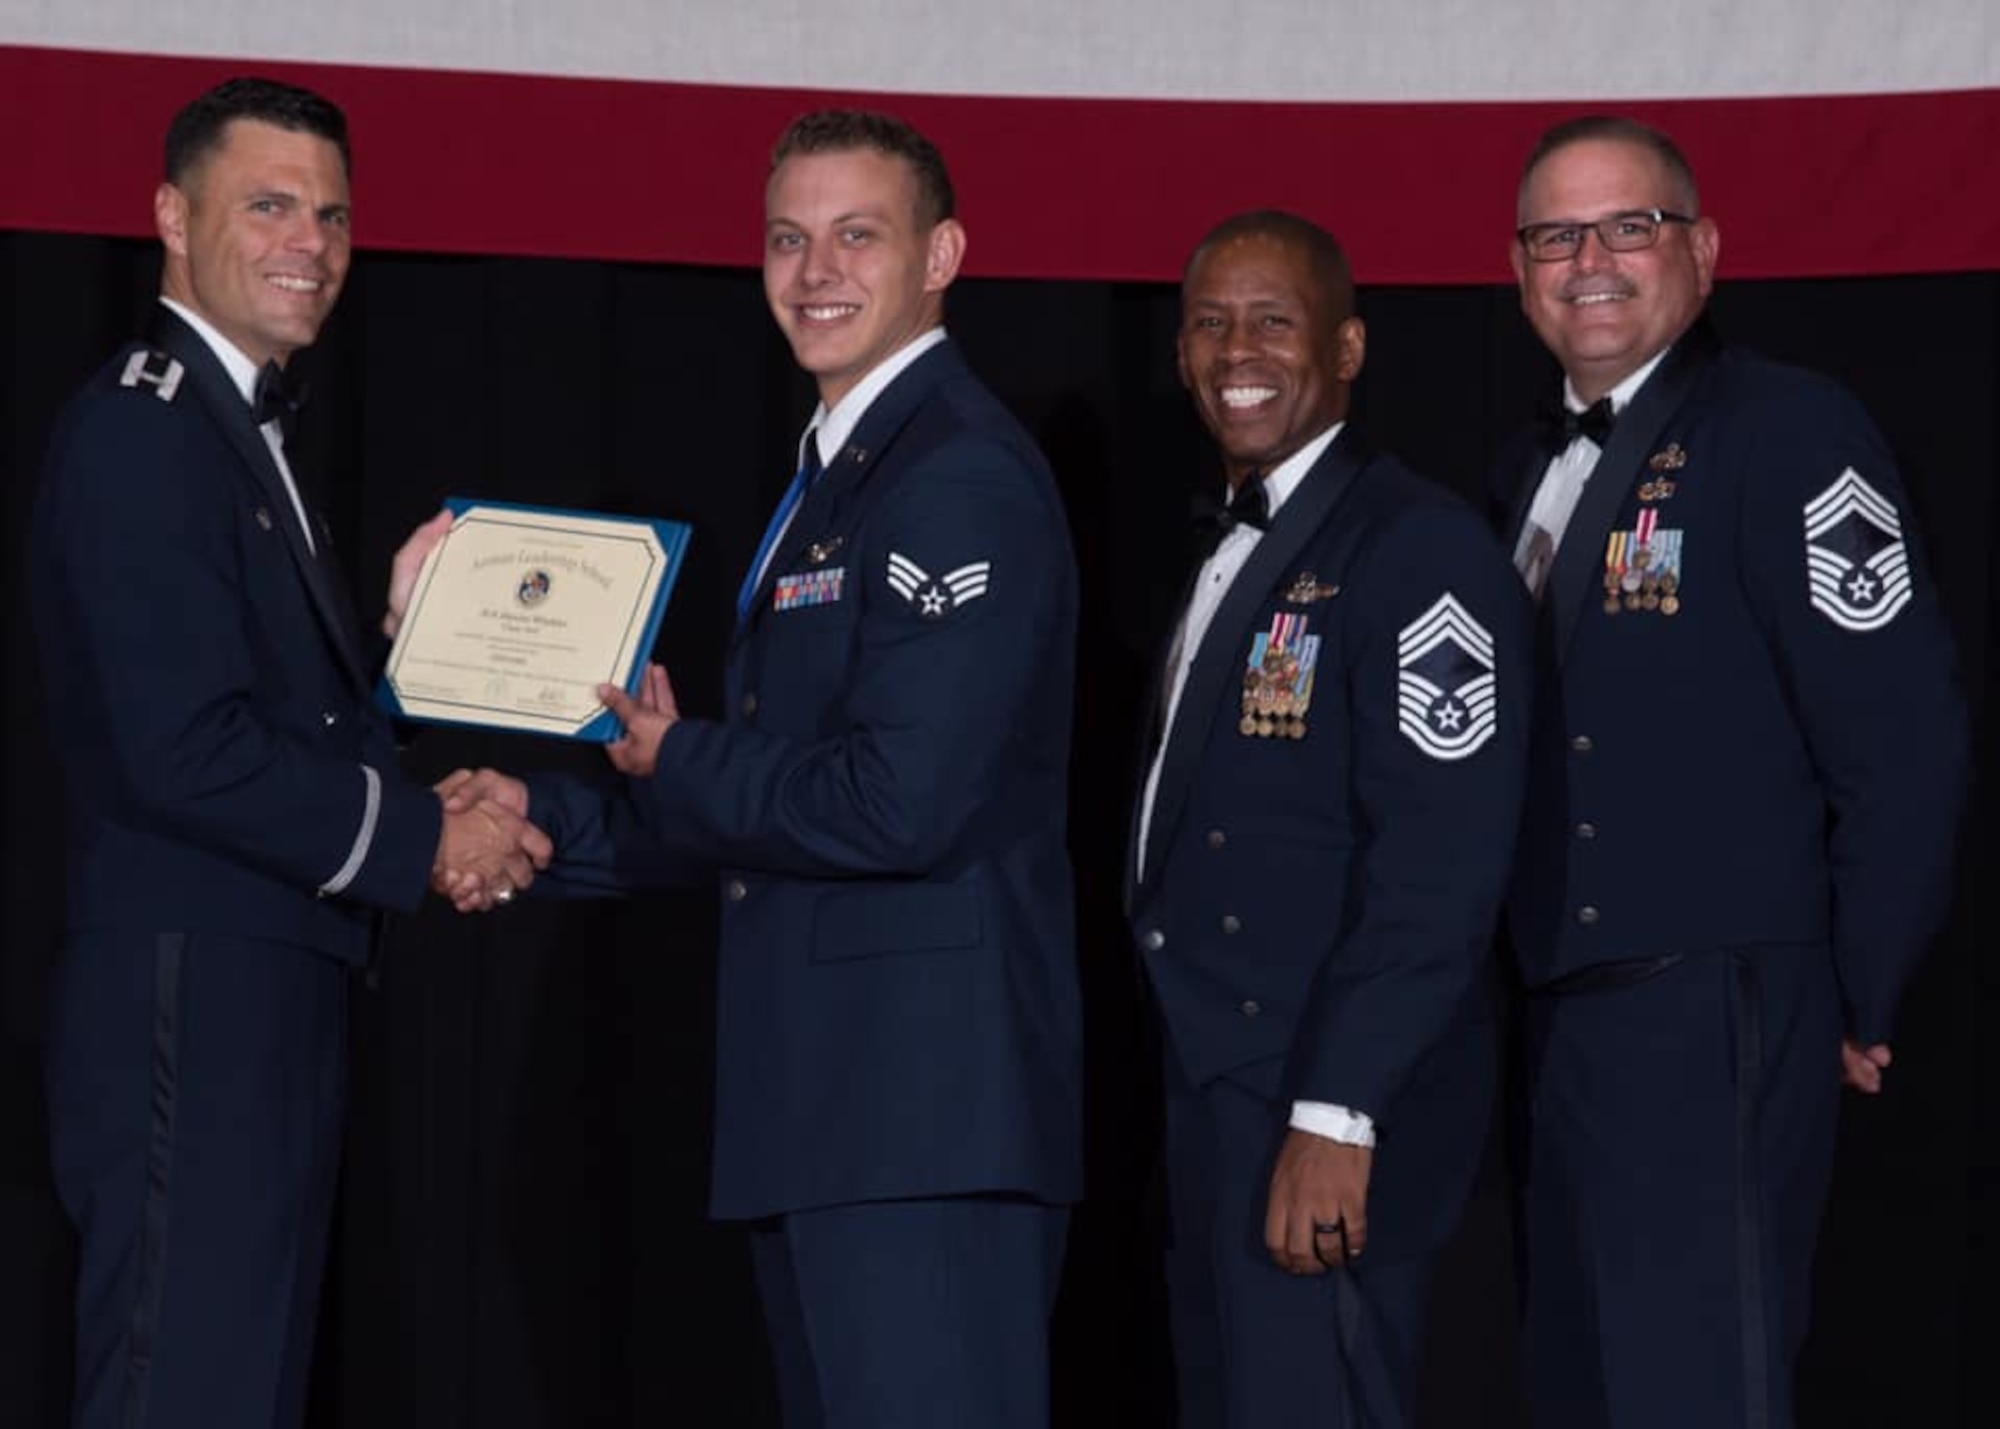 Congratulations to Senior Airman Daniel Winkler who completed Airman Leadership School Aug. 22, 2019, at McConnell Air Force Base, Kan.  Winkler was one of two Reservists in the class.  ALS is a 24 duty day United States Air Force program designed to develop Airmen into effective front-line supervisors.